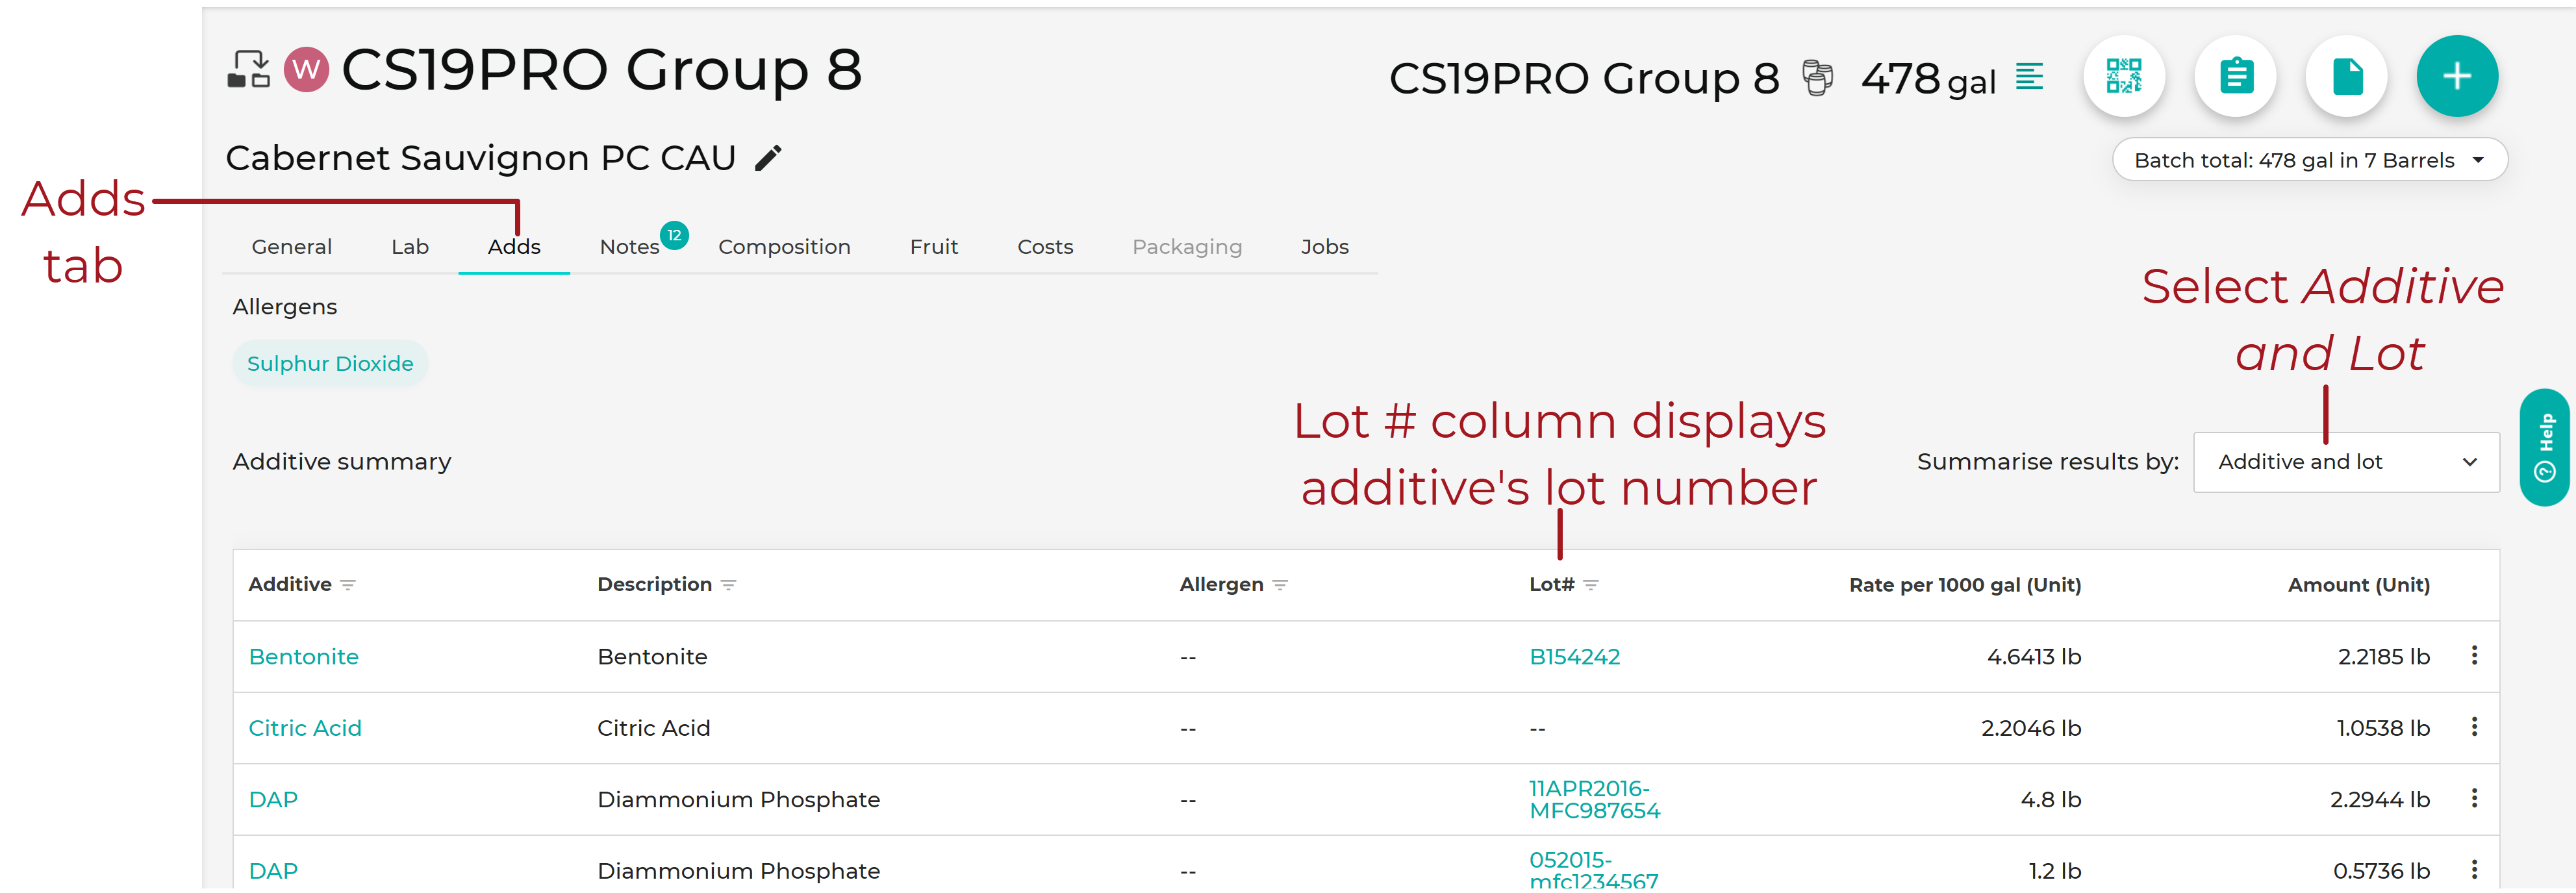 CS19Pro_Group_8_-_Adds_Tab_20201130.png